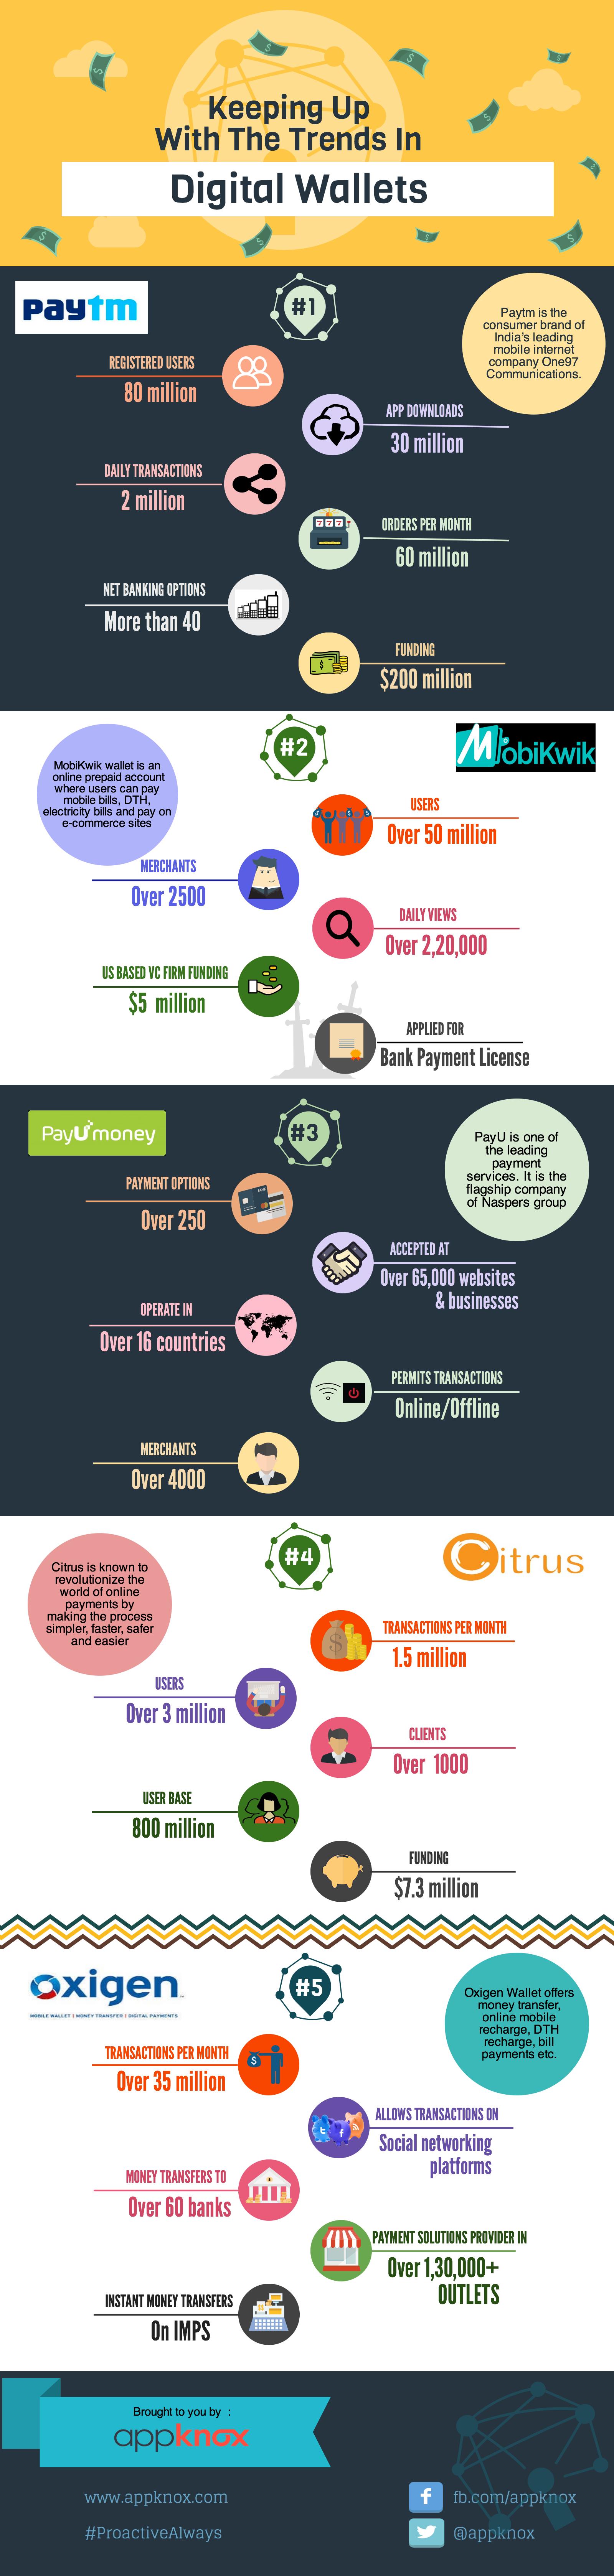 [Infographic] Keeping Up With the Trends in Digital Wallets